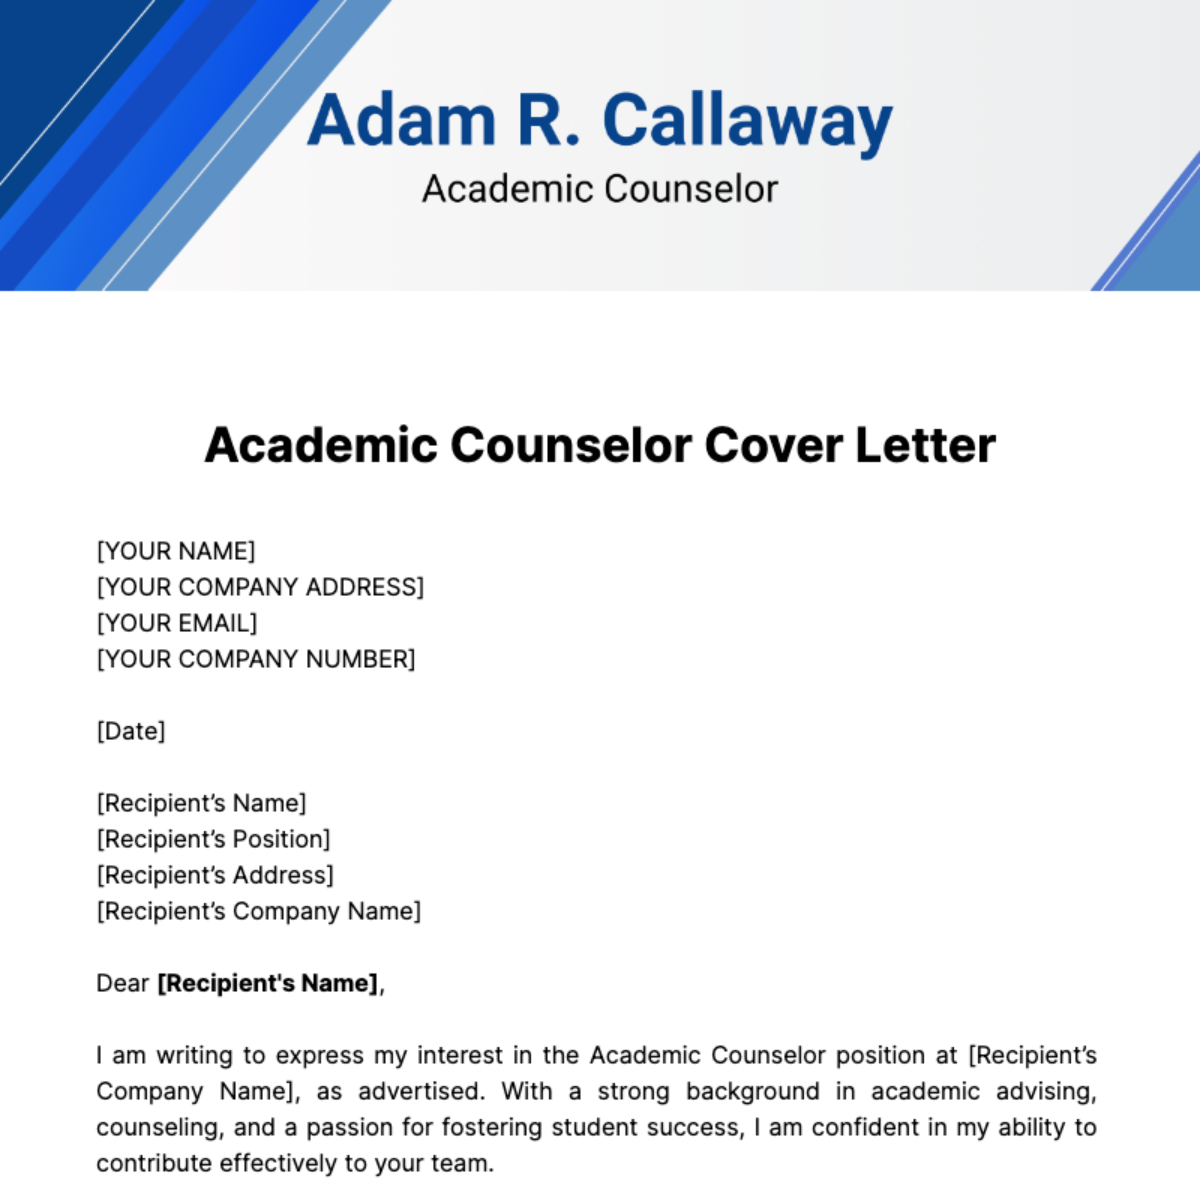 Academic Counselor Cover Letter Template